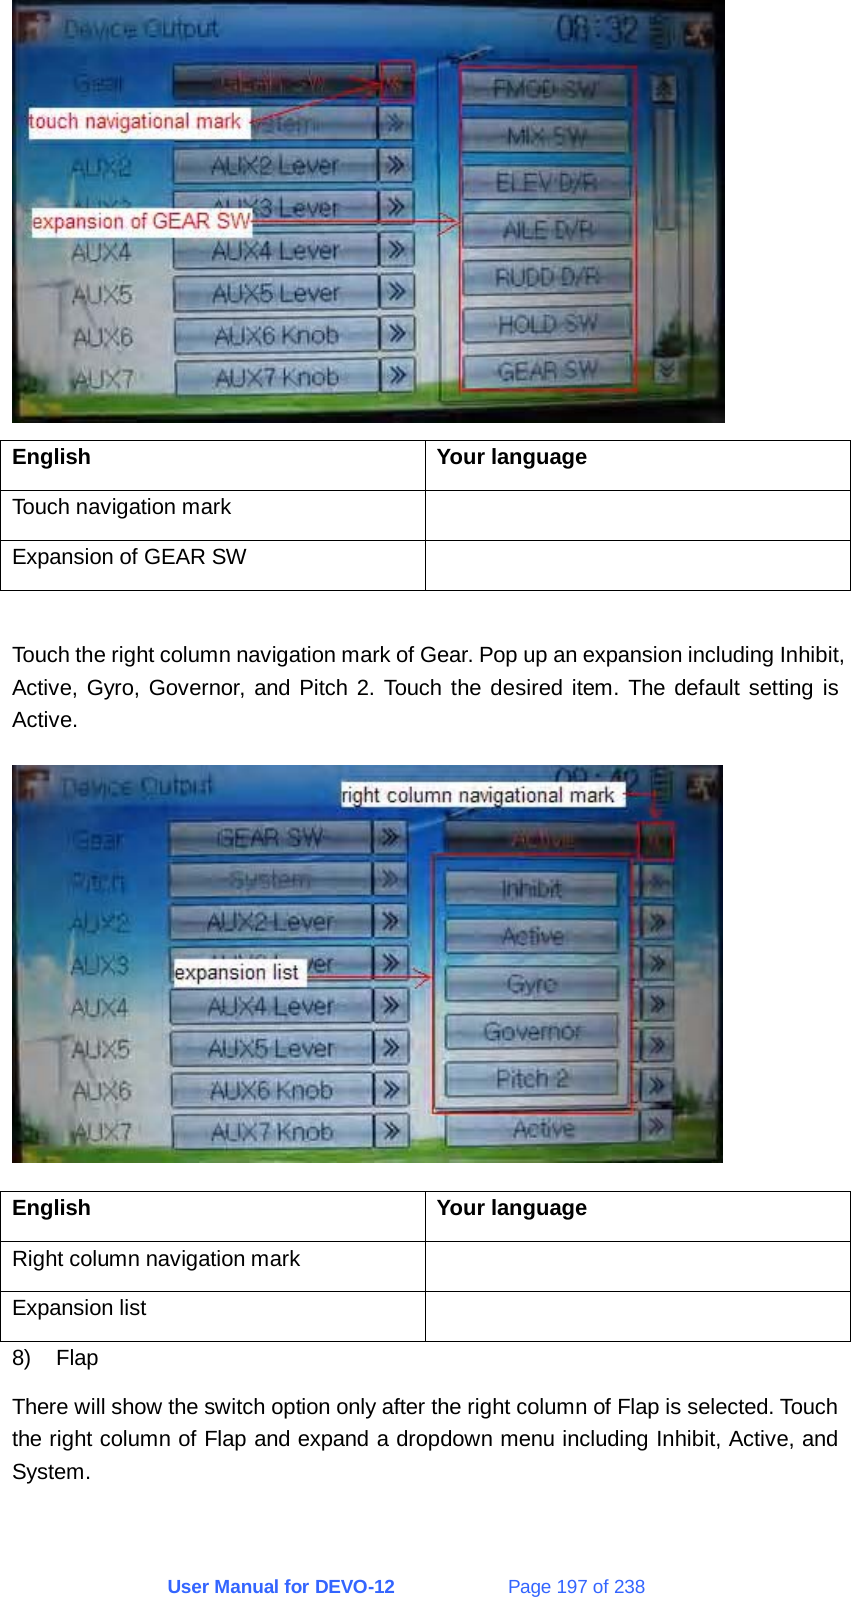 User Manual for DEVO-12             Page 197 of 238  English Your language Touch navigation mark   Expansion of GEAR SW    Touch the right column navigation mark of Gear. Pop up an expansion including Inhibit, Active, Gyro, Governor, and Pitch 2. Touch the desired item. The default setting is Active.  English Your language Right column navigation mark   Expansion list   8) Flap There will show the switch option only after the right column of Flap is selected. Touch the right column of Flap and expand a dropdown menu including Inhibit, Active, and System. 